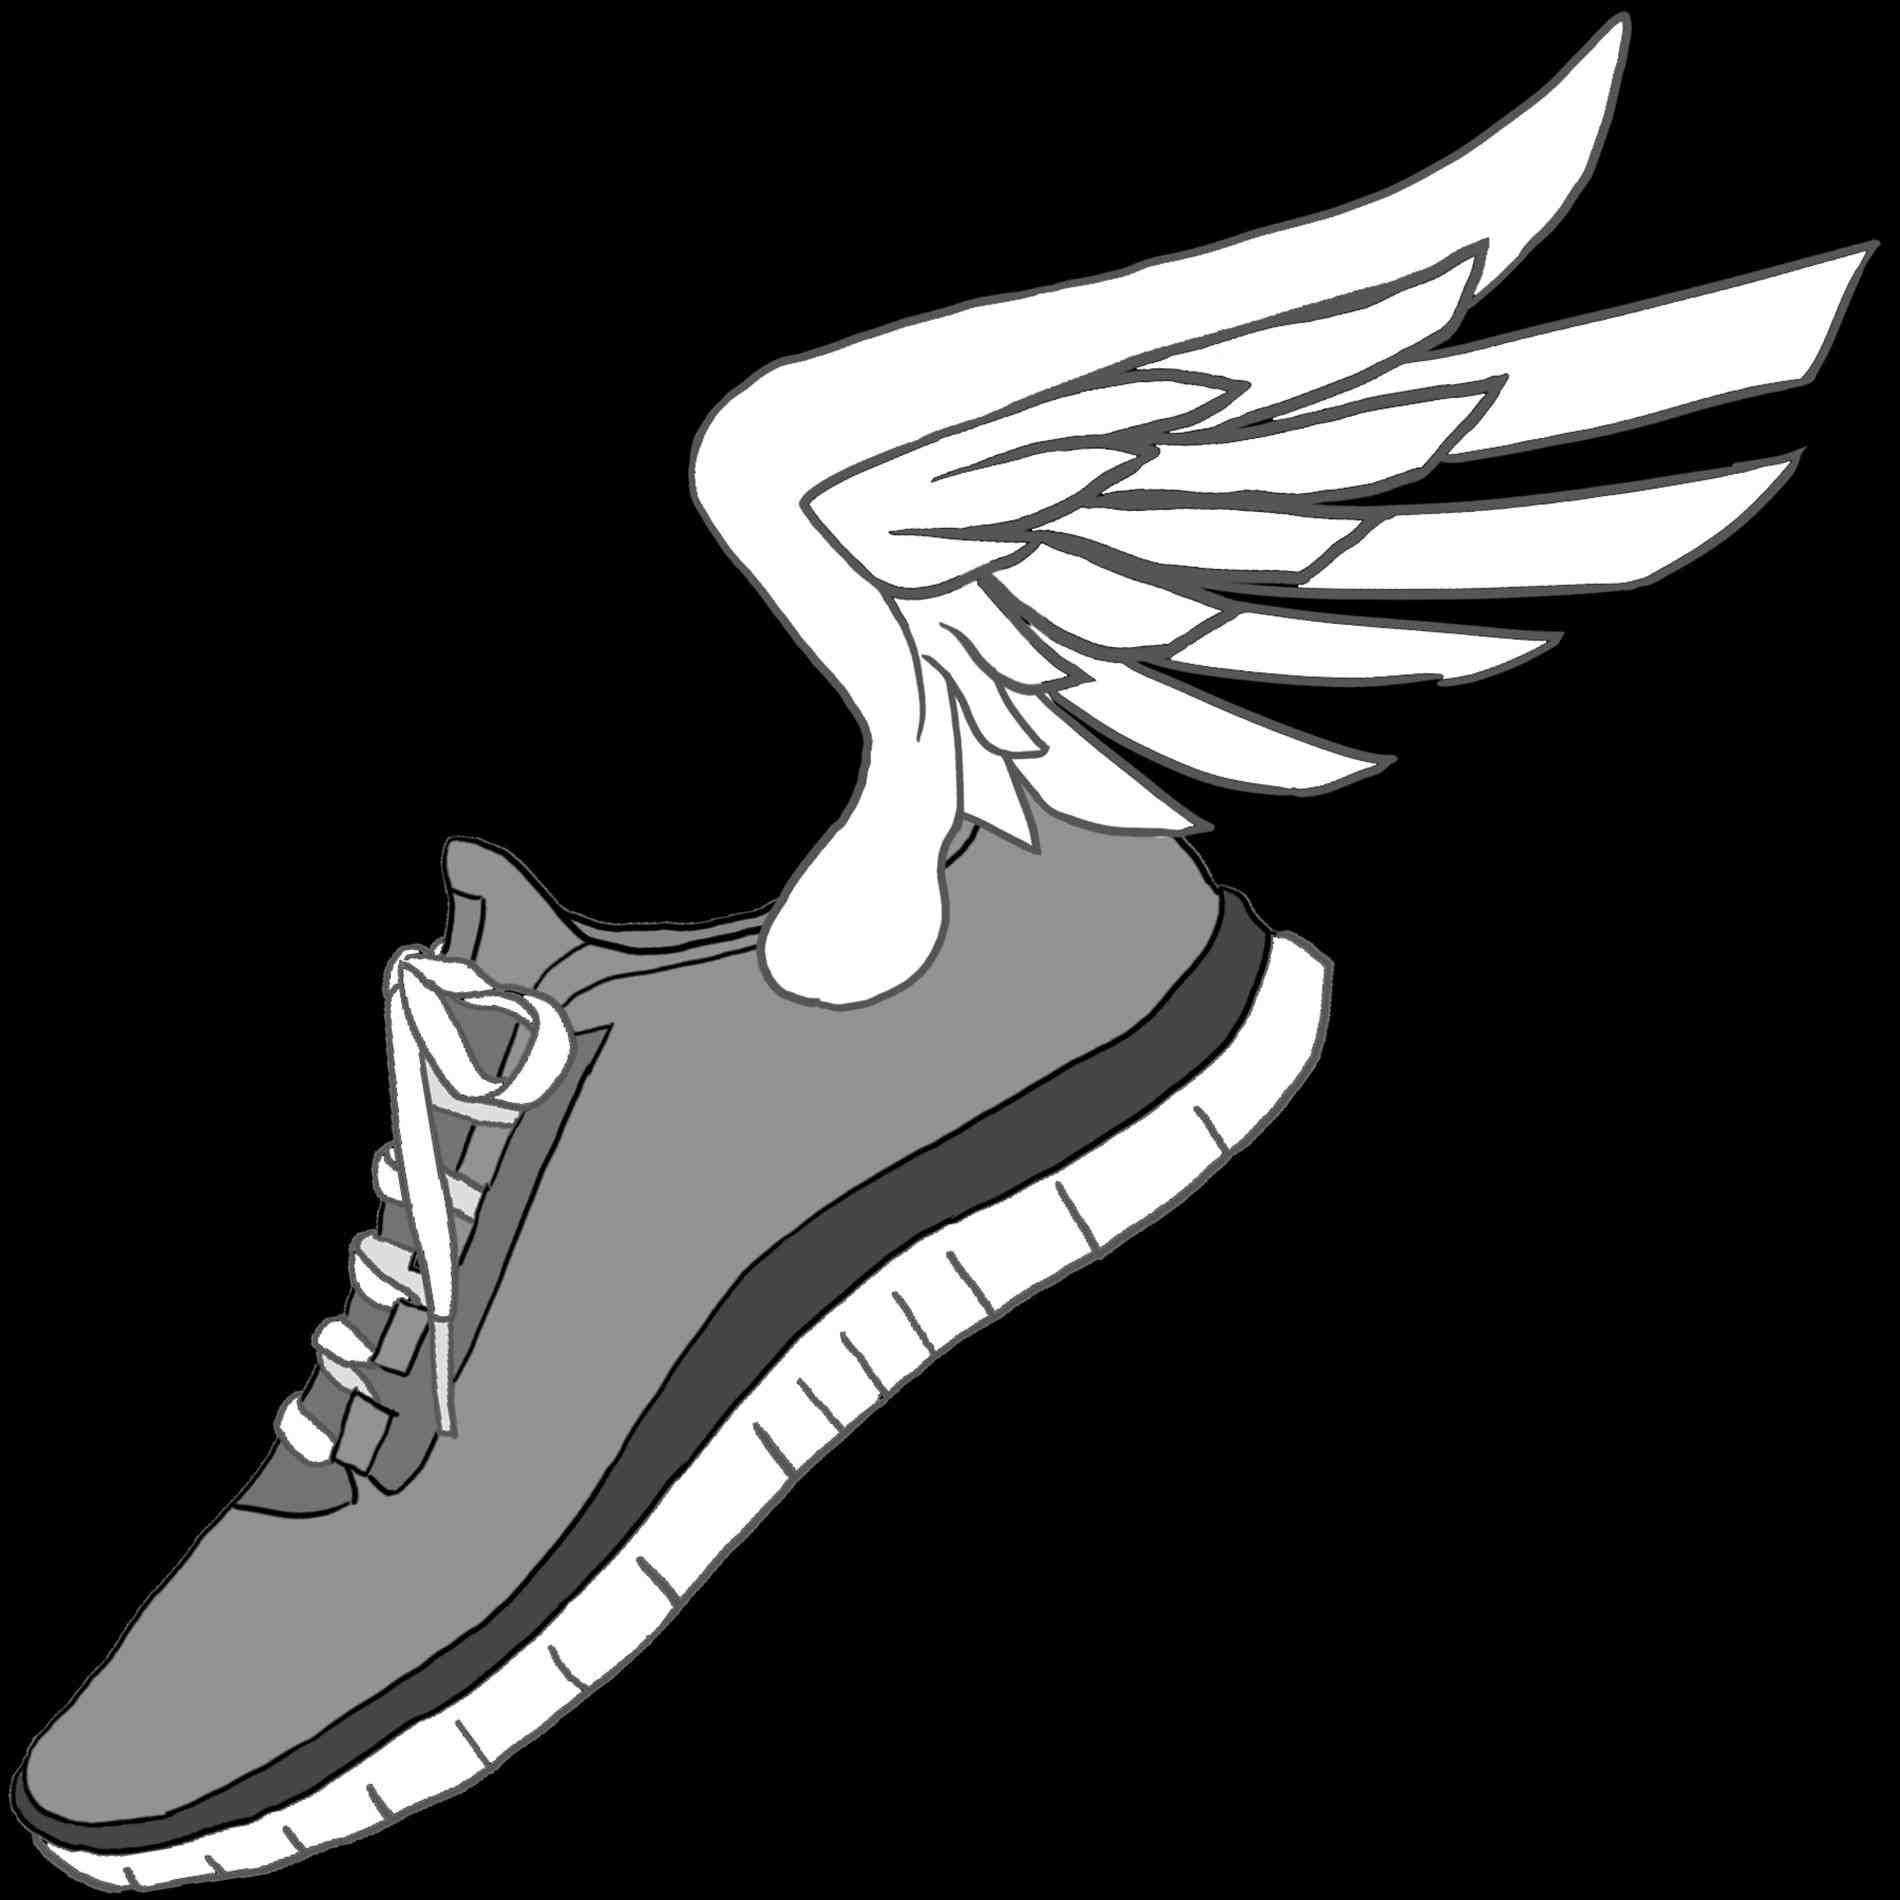 wings image wiki track runnin - Running Shoes Clipart